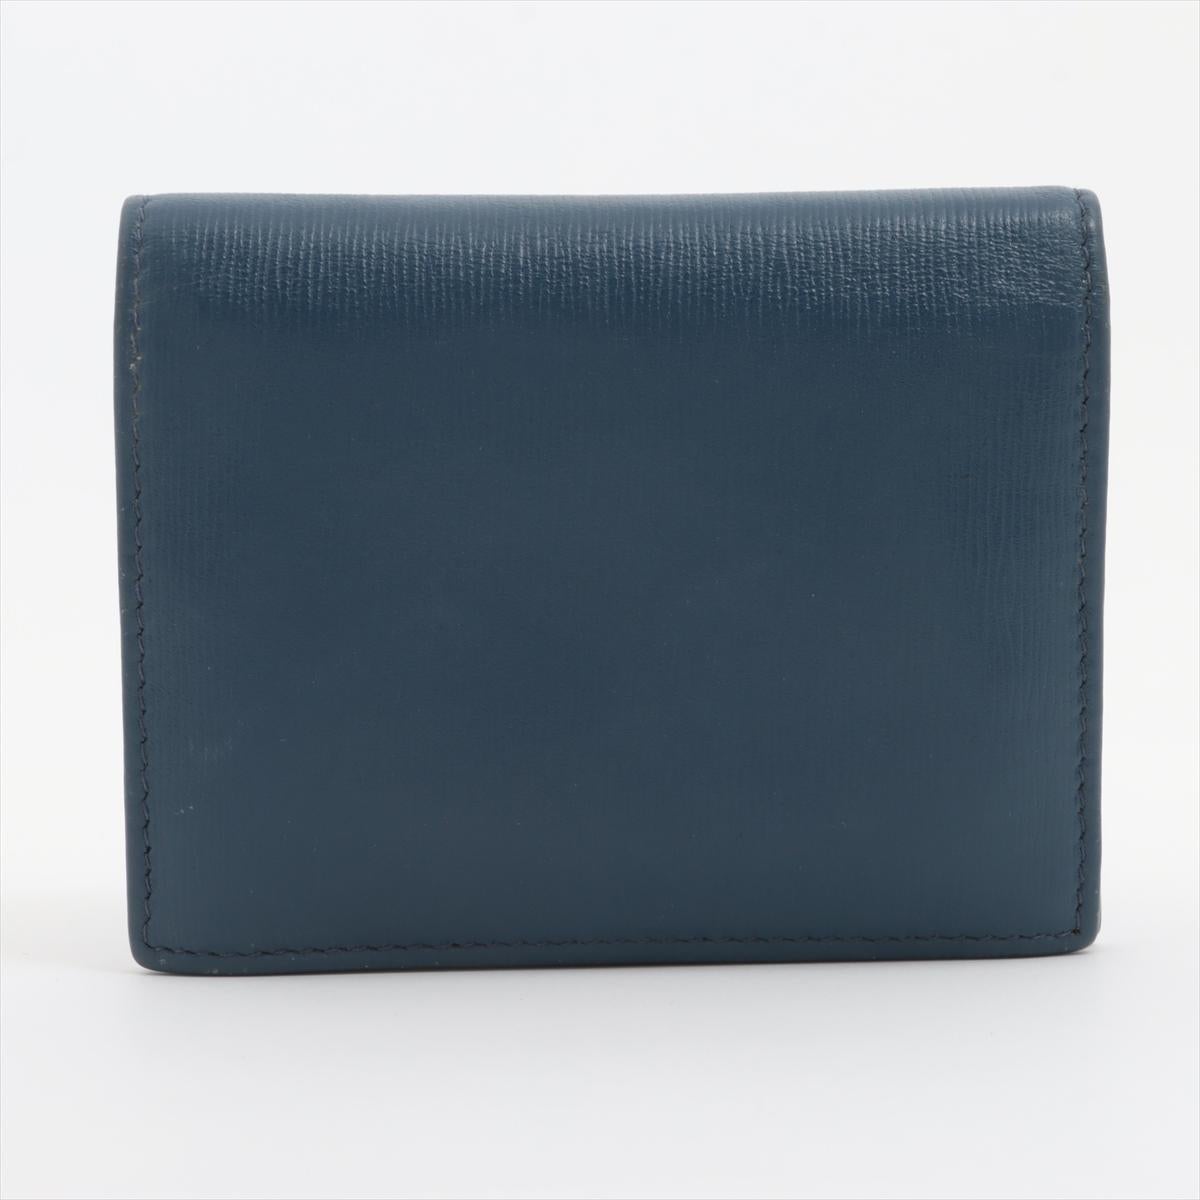 Prada Vitello Move Leather Compact Wallet Blue In Good Condition For Sale In Indianapolis, IN